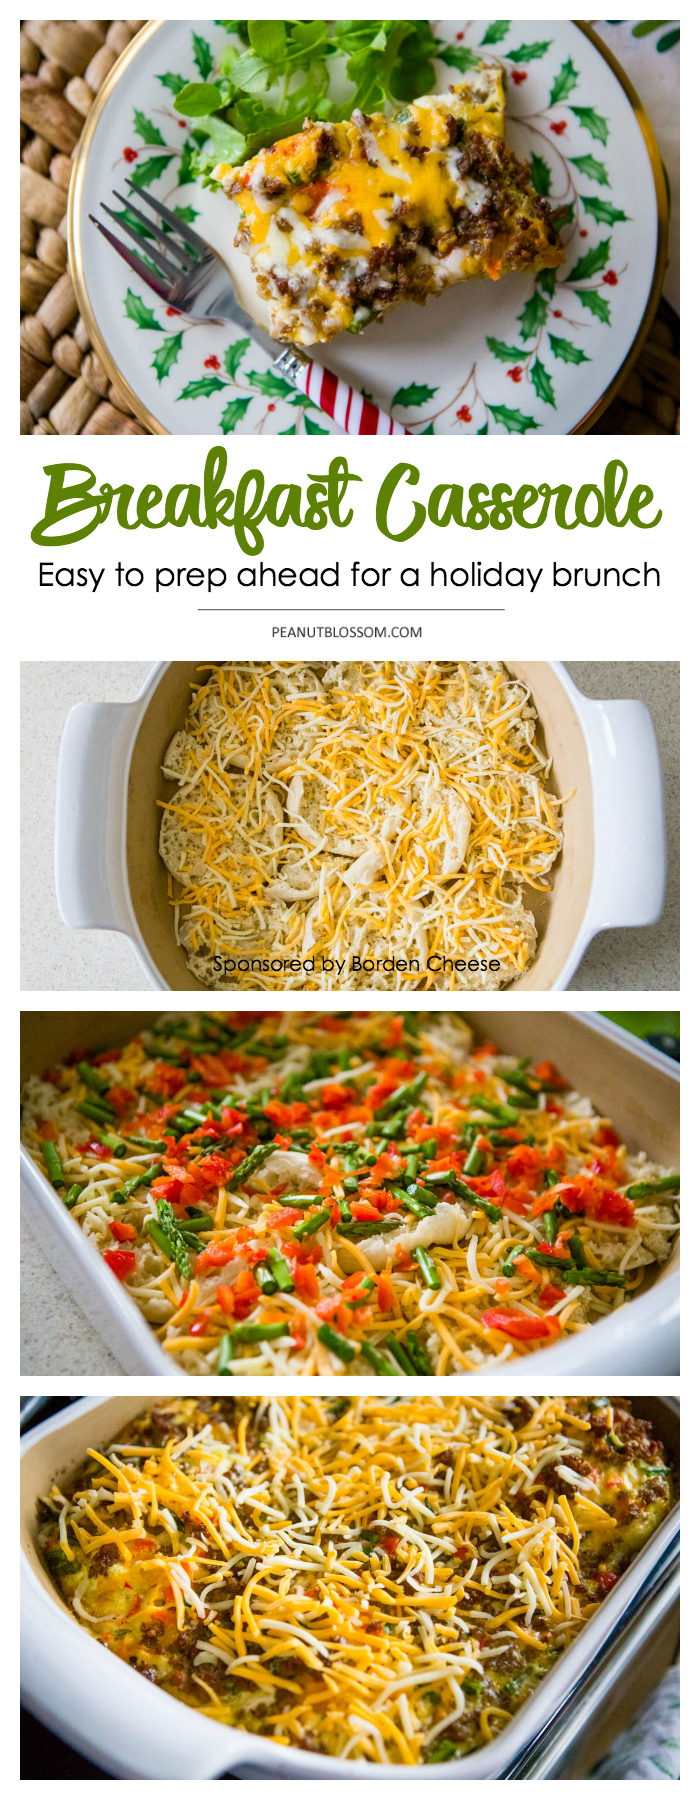 Cheese and Sausage Breakfast Casserole: Holiday brunch in a pinch